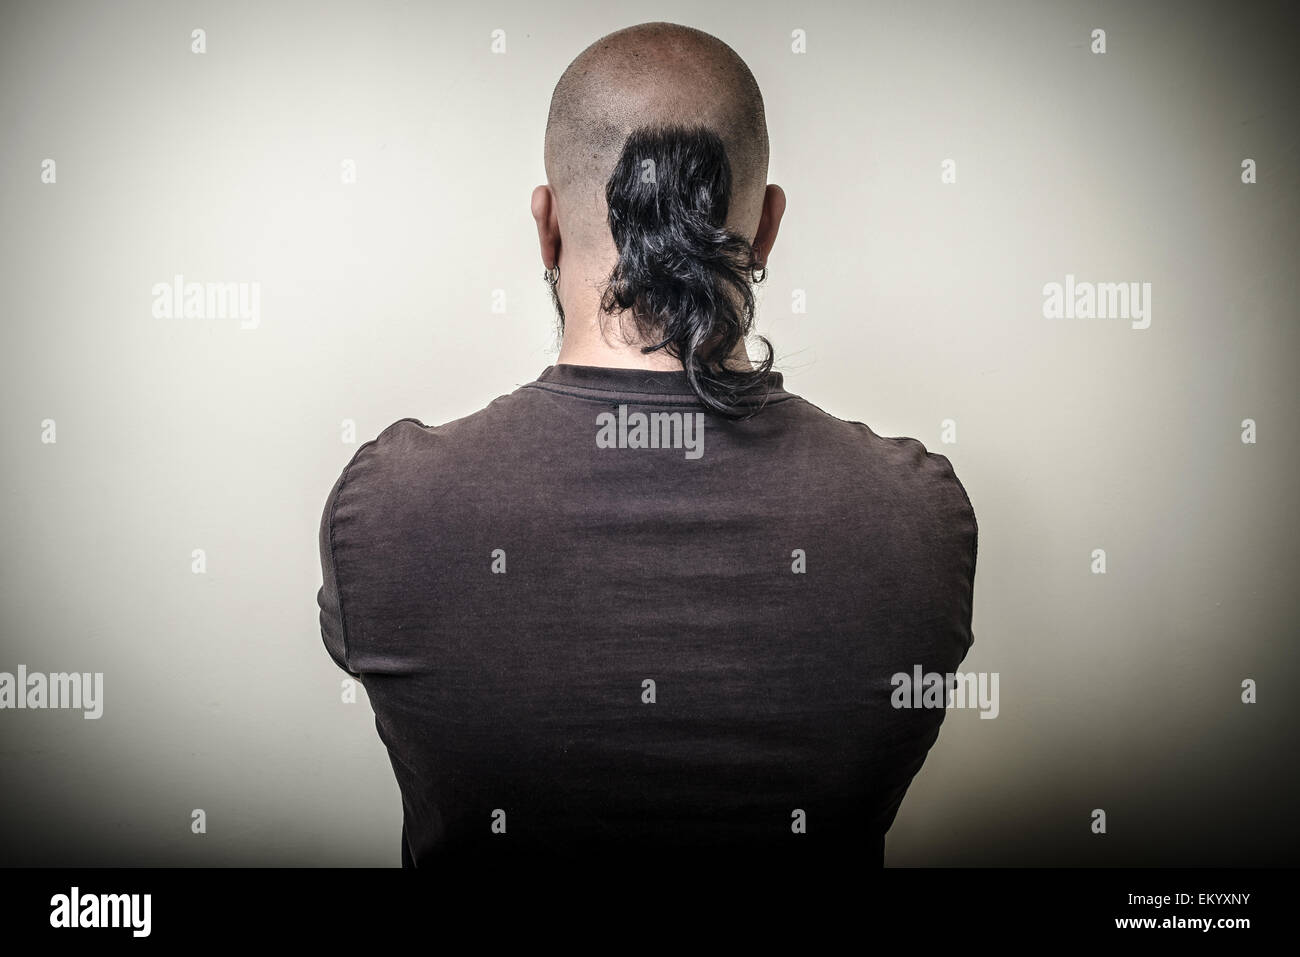 great back of a large person Stock Photo